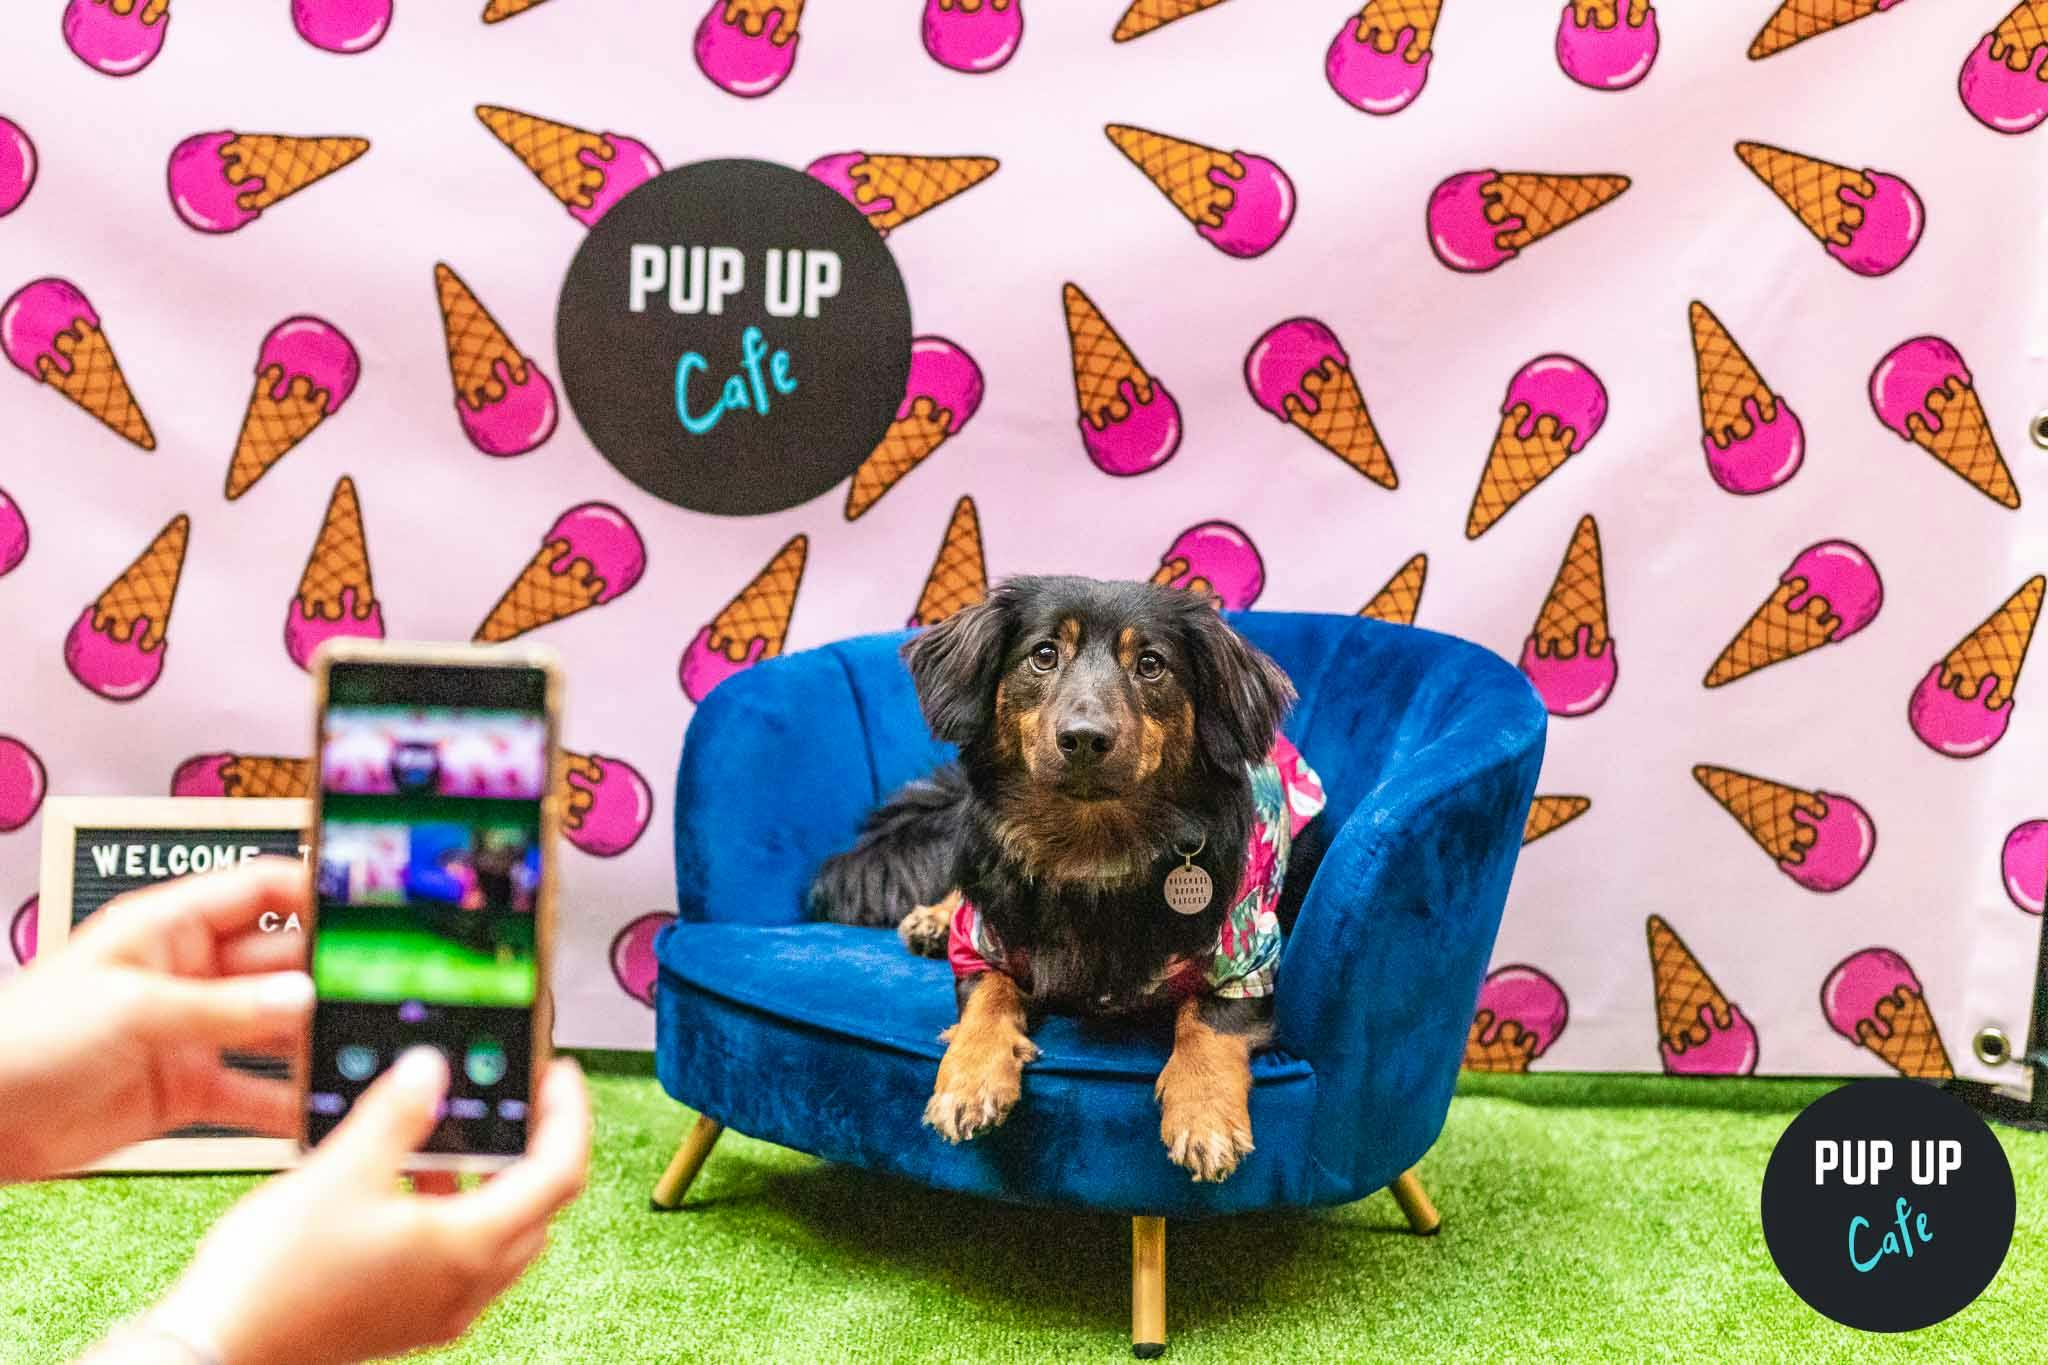 Pup Up Café is coming to Ipswich!